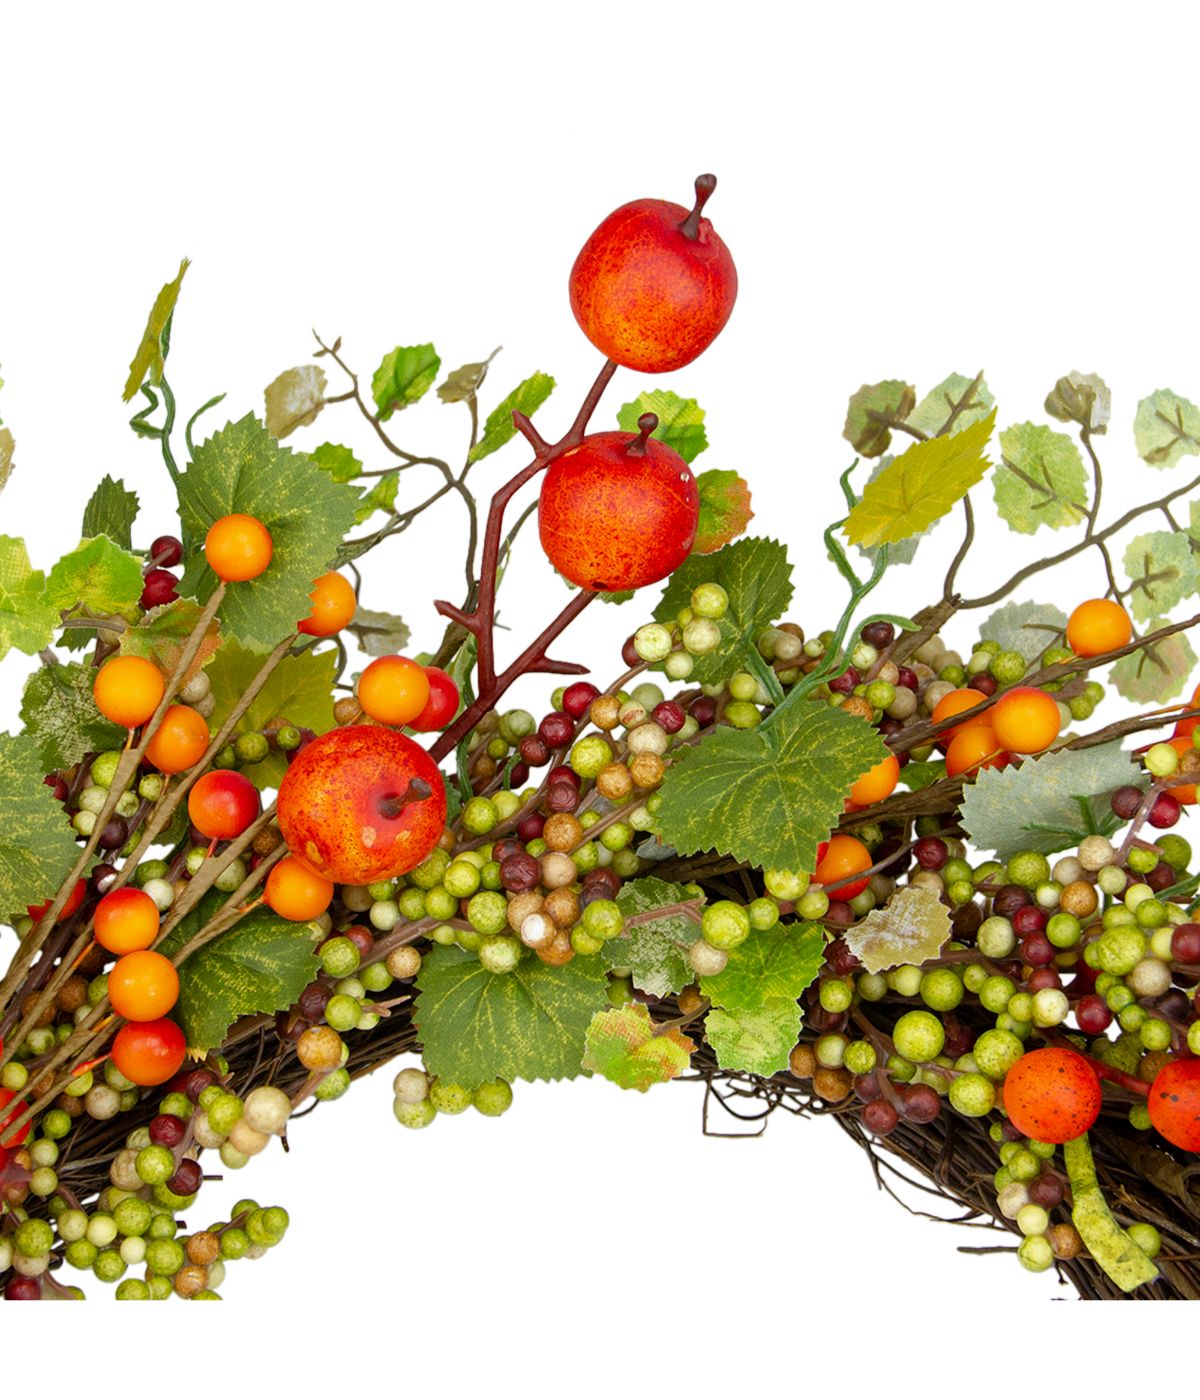 Apples and Berries Artificial Fall Harvest Wreath Orange